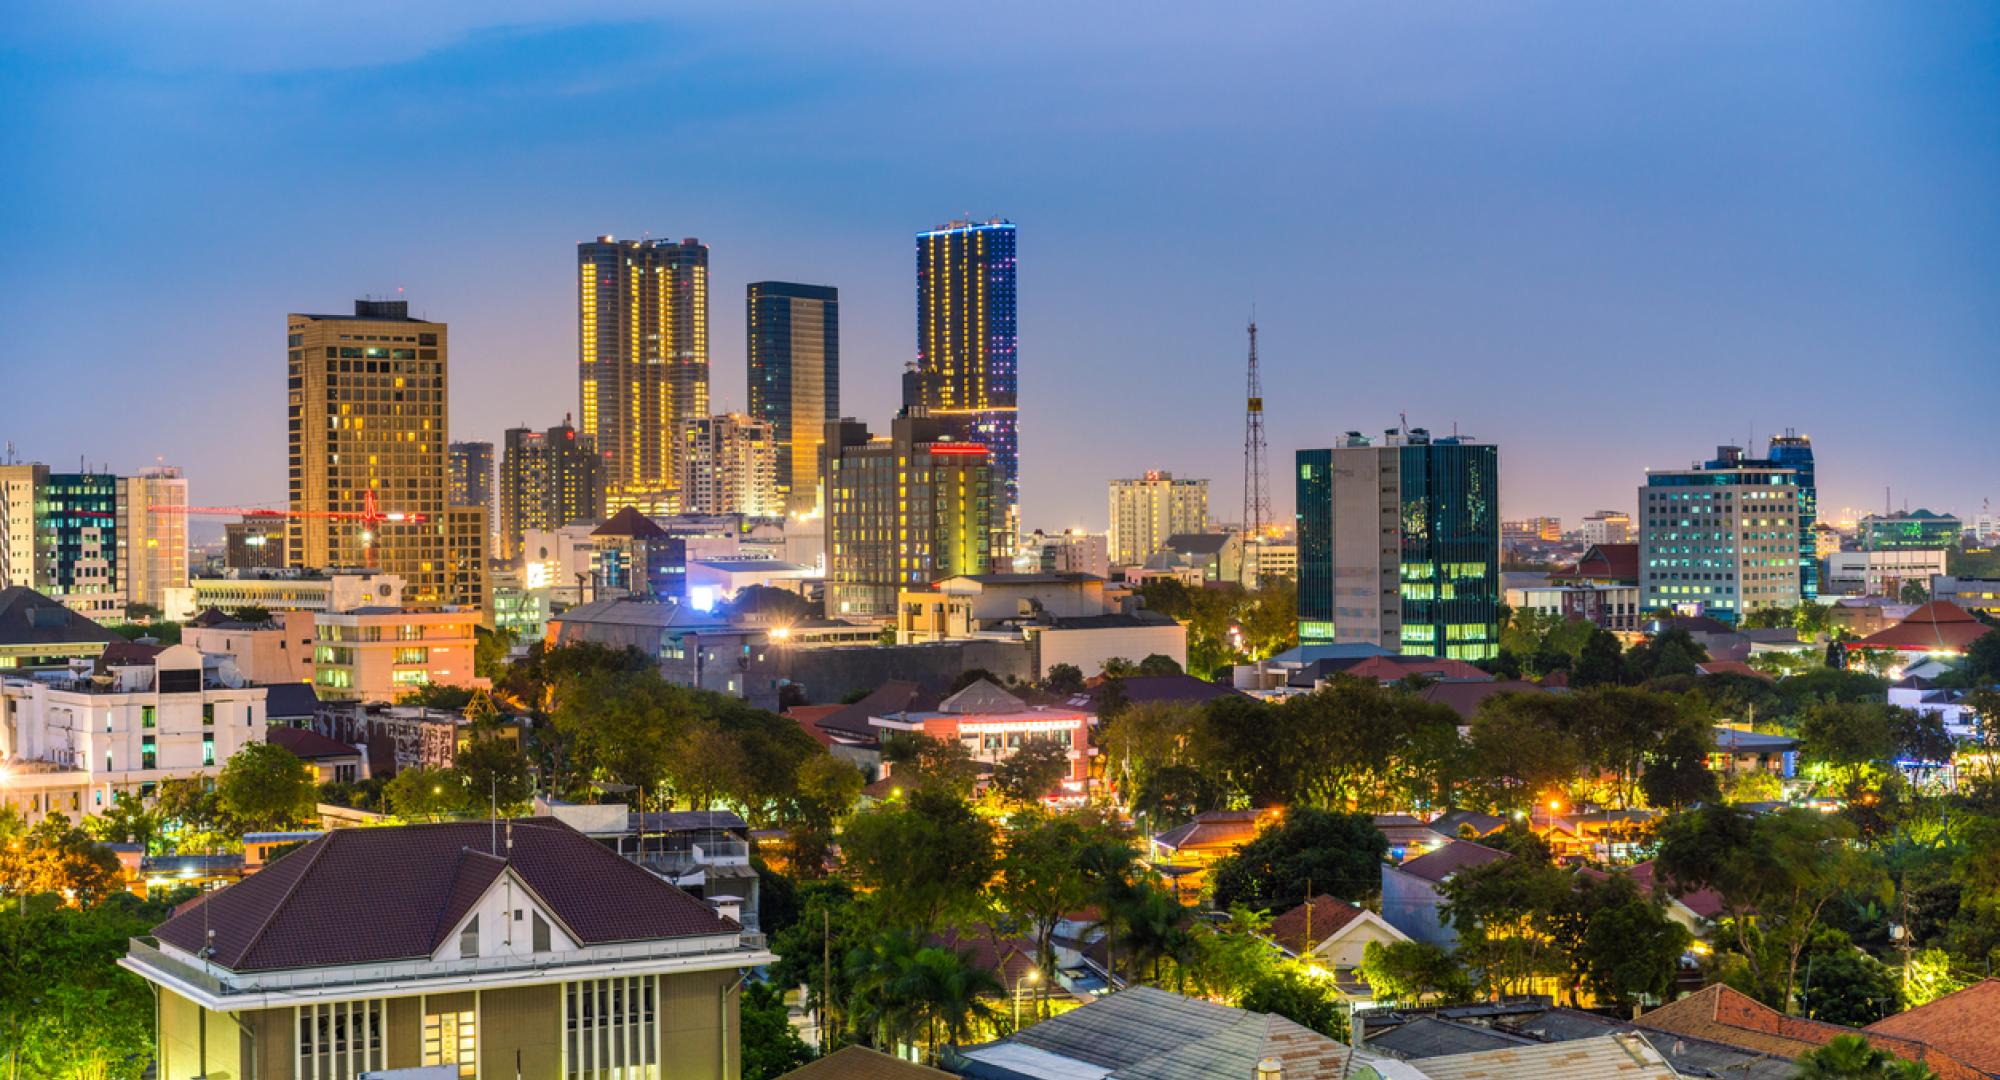 view showing Surabaya City at night, buildings, towers, houses and trees can be seen on the background